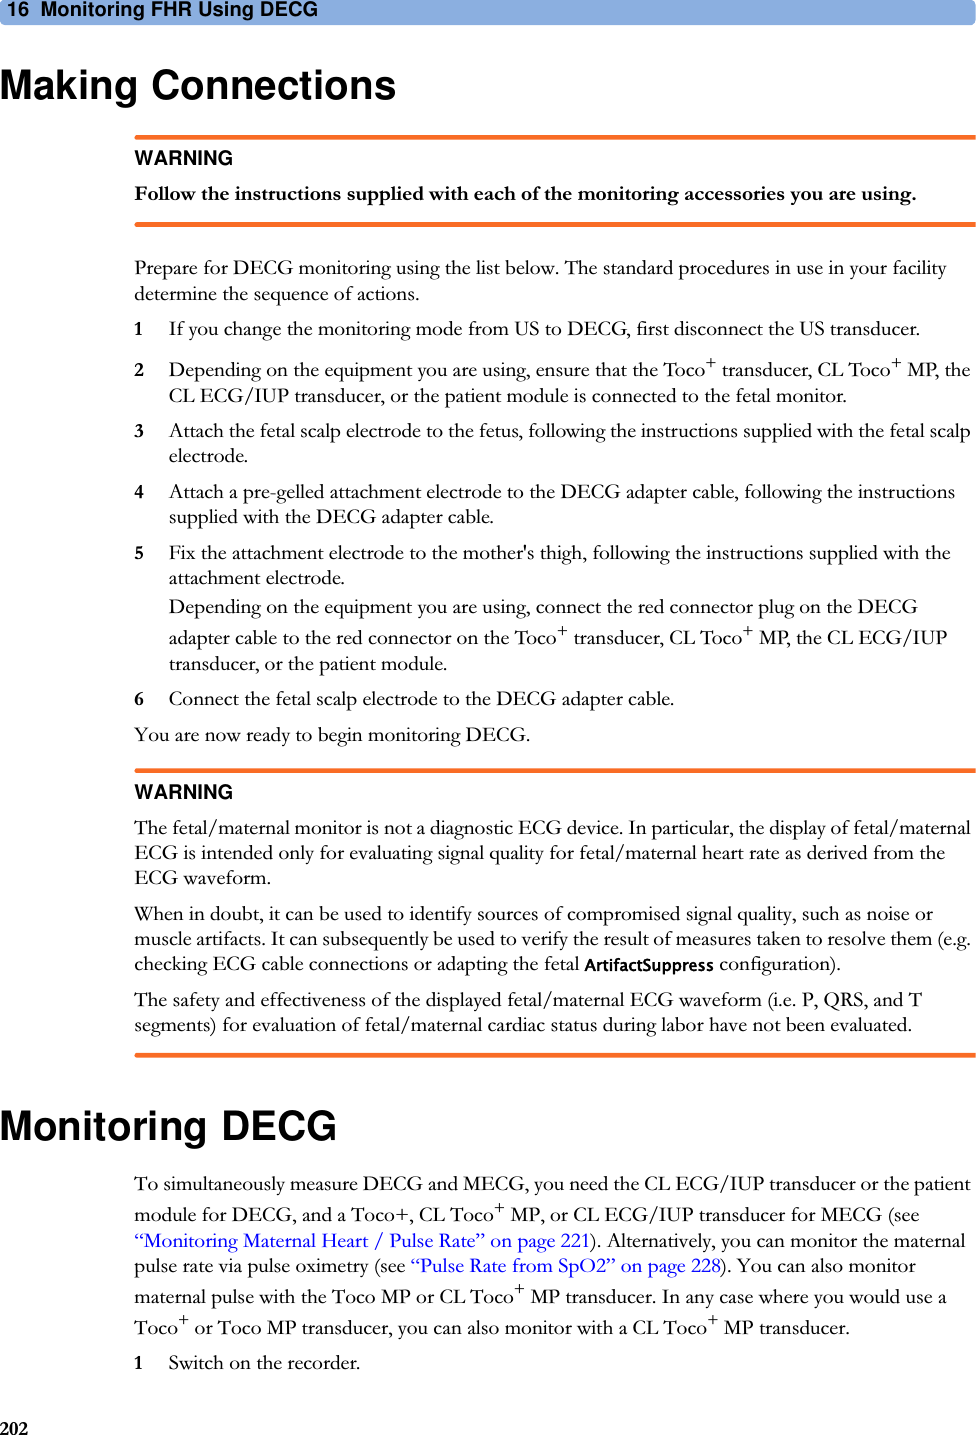 16  Monitoring FHR Using DECG202Making ConnectionsWARNINGFollow the instructions supplied with each of the monitoring accessories you are using.Prepare for DECG monitoring using the list below. The standard procedures in use in your facility determine the sequence of actions.1If you change the monitoring mode from US to DECG, first disconnect the US transducer.2Depending on the equipment you are using, ensure that the Toco+ transducer, CL Toco+ MP, the CL ECG/IUP transducer, or the patient module is connected to the fetal monitor.3Attach the fetal scalp electrode to the fetus, following the instructions supplied with the fetal scalp electrode.4Attach a pre-gelled attachment electrode to the DECG adapter cable, following the instructions supplied with the DECG adapter cable.5Fix the attachment electrode to the mother&apos;s thigh, following the instructions supplied with the attachment electrode.Depending on the equipment you are using, connect the red connector plug on the DECG adapter cable to the red connector on the Toco+ transducer, CL Toco+ MP, the CL ECG/IUP transducer, or the patient module.6Connect the fetal scalp electrode to the DECG adapter cable.You are now ready to begin monitoring DECG.WARNINGThe fetal/maternal monitor is not a diagnostic ECG device. In particular, the display of fetal/maternal ECG is intended only for evaluating signal quality for fetal/maternal heart rate as derived from the ECG waveform.When in doubt, it can be used to identify sources of compromised signal quality, such as noise or muscle artifacts. It can subsequently be used to verify the result of measures taken to resolve them (e.g. checking ECG cable connections or adapting the fetal ArtifactSuppress configuration).The safety and effectiveness of the displayed fetal/maternal ECG waveform (i.e. P, QRS, and T segments) for evaluation of fetal/maternal cardiac status during labor have not been evaluated.Monitoring DECGTo simultaneously measure DECG and MECG, you need the CL ECG/IUP transducer or the patient module for DECG, and a Toco+, CL Toco+ MP, or CL ECG/IUP transducer for MECG (see “Monitoring Maternal Heart / Pulse Rate” on page 221). Alternatively, you can monitor the maternal pulse rate via pulse oximetry (see “Pulse Rate from SpO2” on page 228). You can also monitor maternal pulse with the Toco MP or CL Toco+ MP transducer. In any case where you would use a Toco+ or Toco MP transducer, you can also monitor with a CL Toco+ MP transducer.1Switch on the recorder.